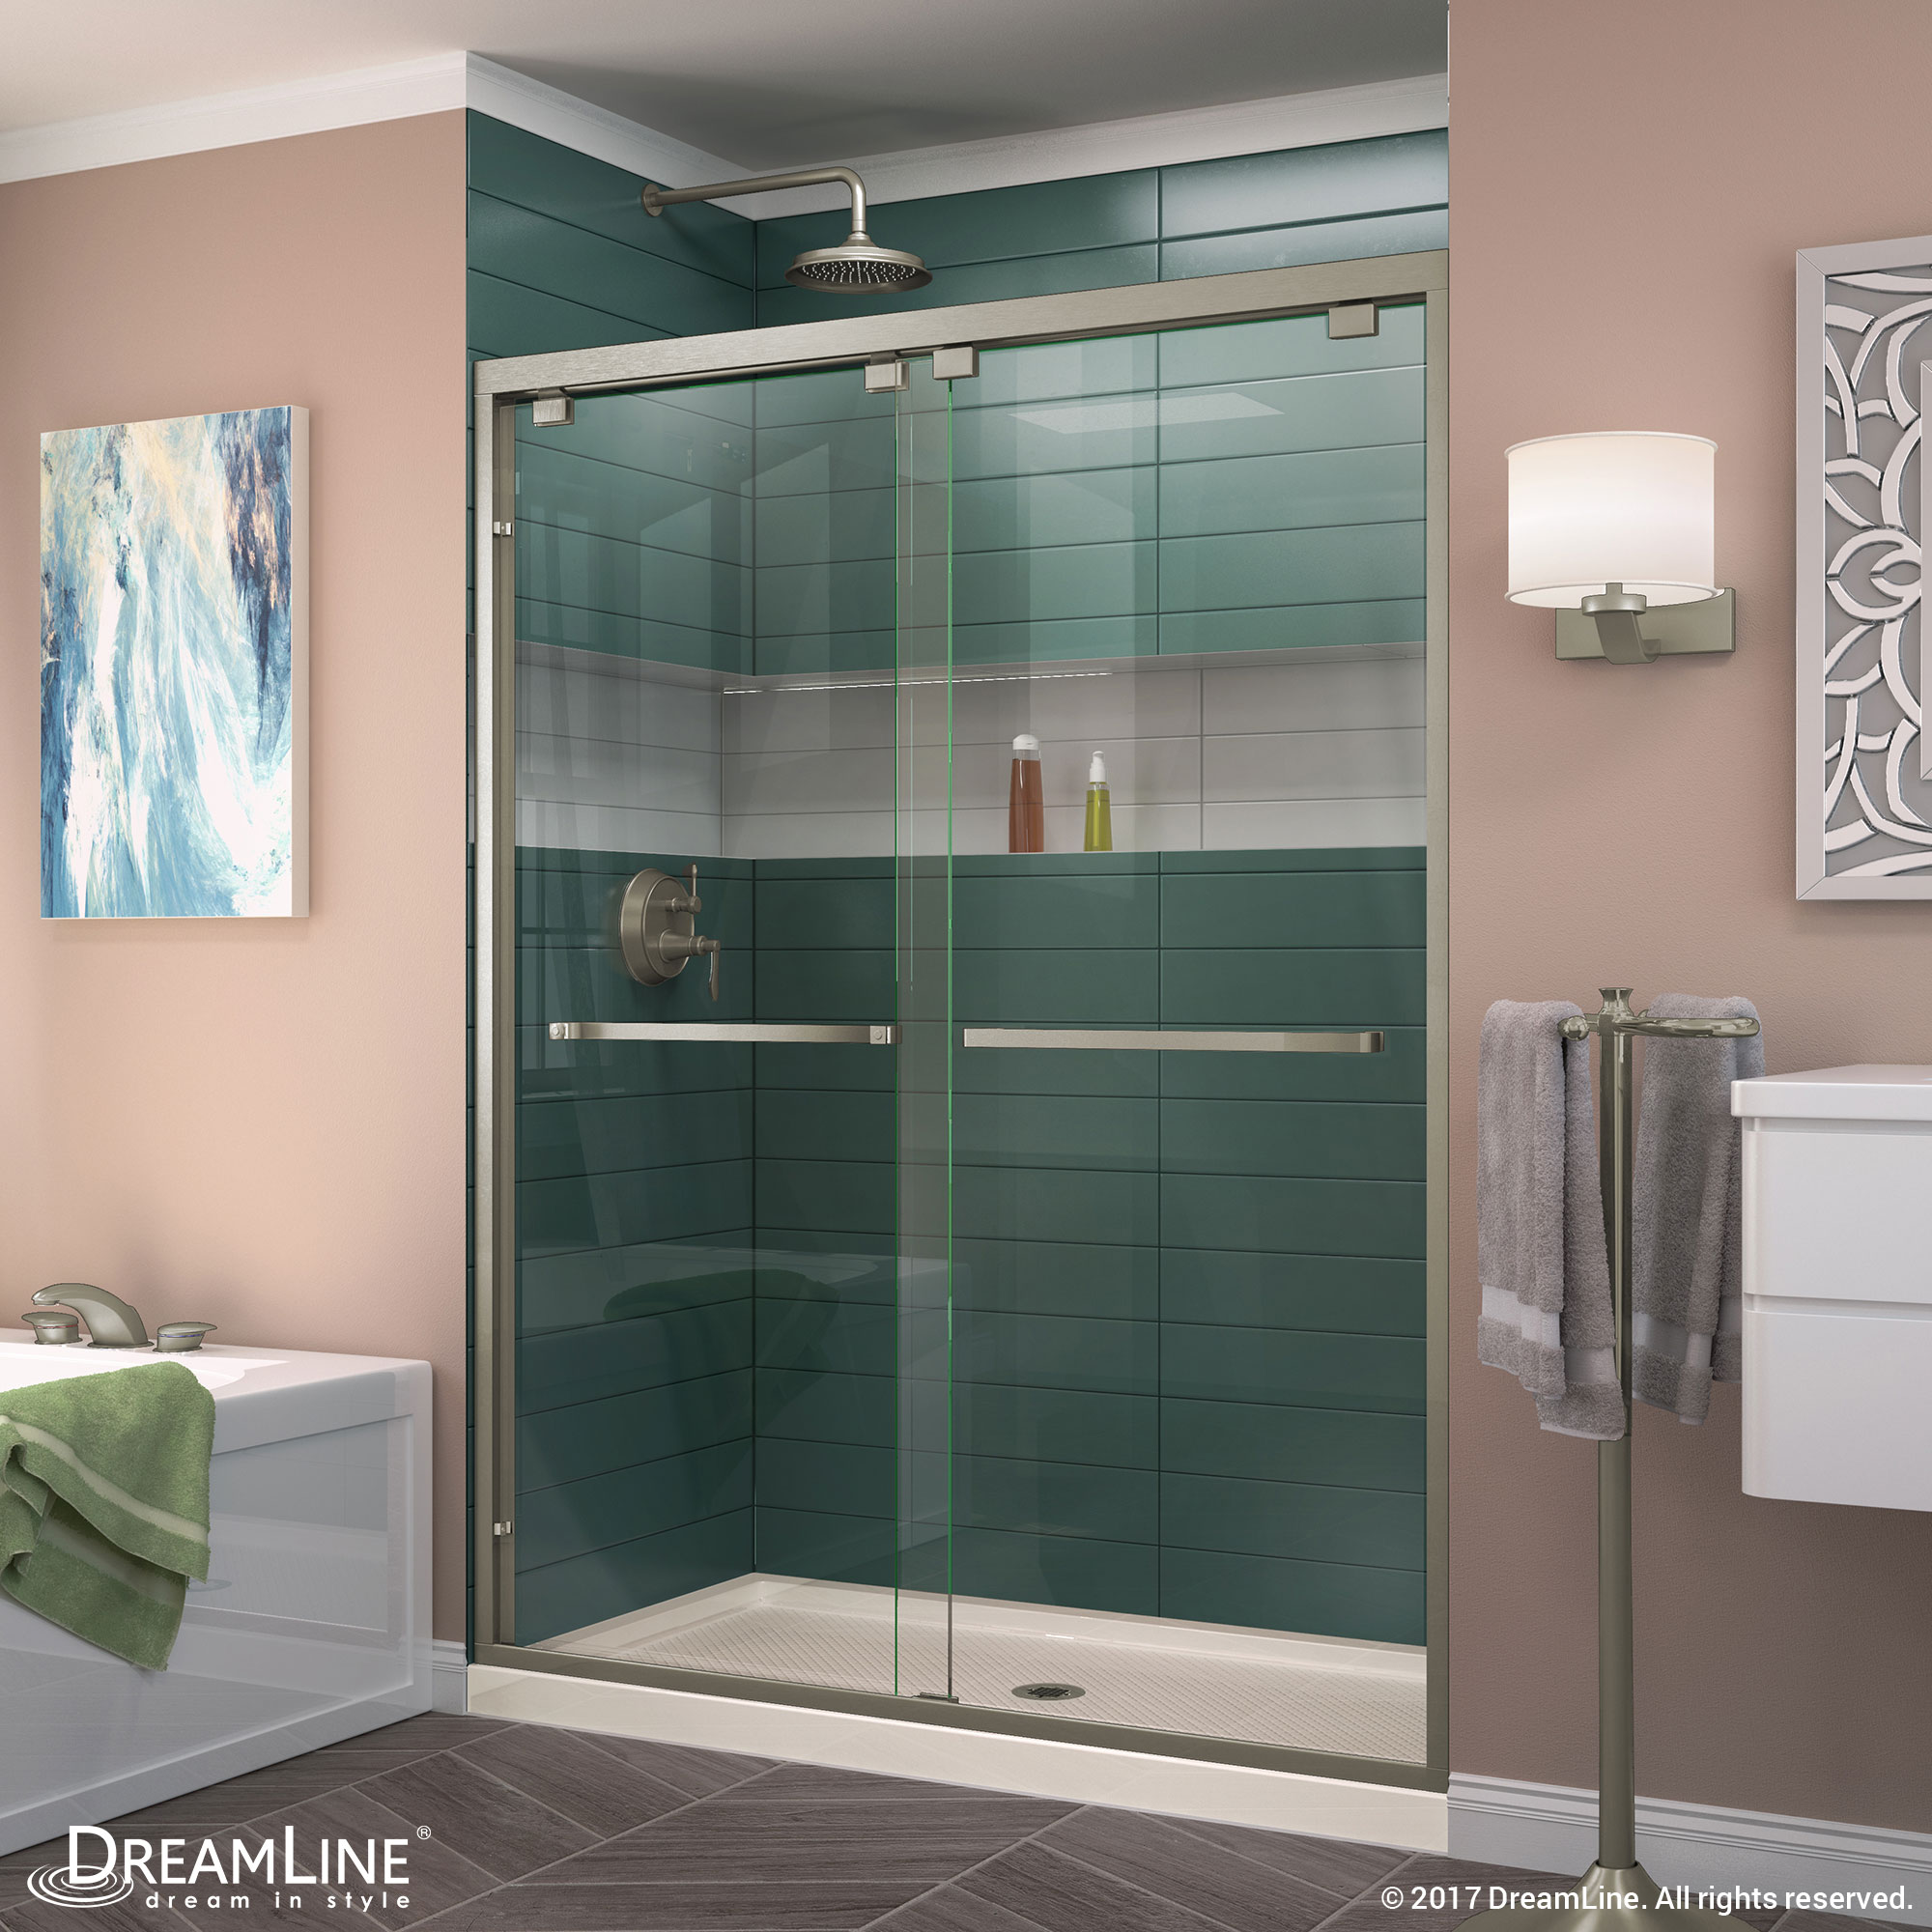 DreamLine Encore 30 in. D x 60 in. W x 78 3/4 in. H Bypass Shower Door in Chrome and Center Drain Biscuit Base Kit